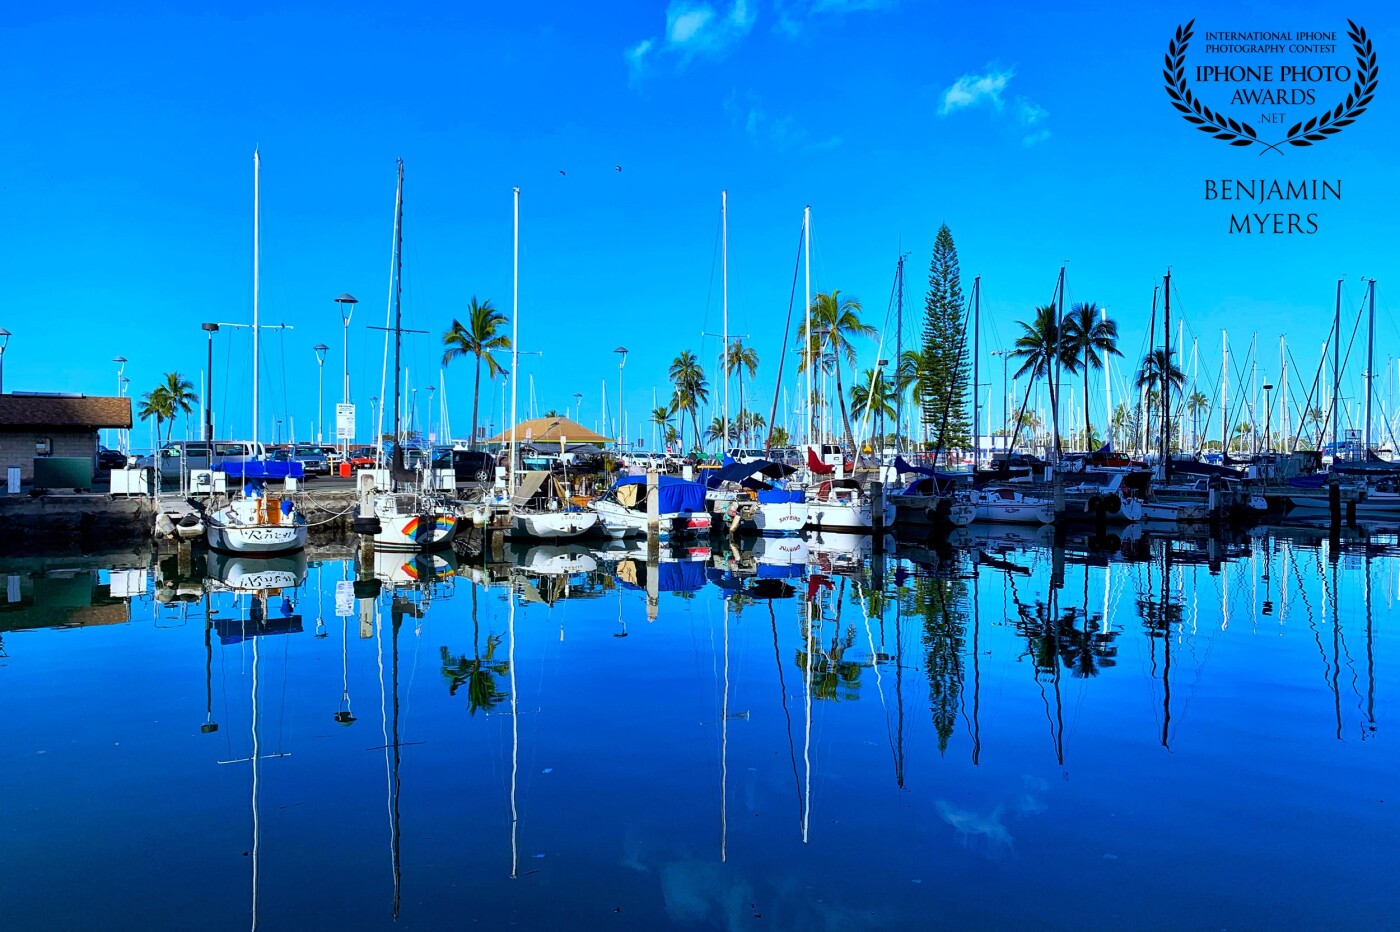 I sometimes leave early for work and watch the waves as they come in. This particular morning I stopped near the Ala Wai Boat Harbor, and the water was calm and glassy. I took this shot and was amazed at how it was almost a mirror reflection. 